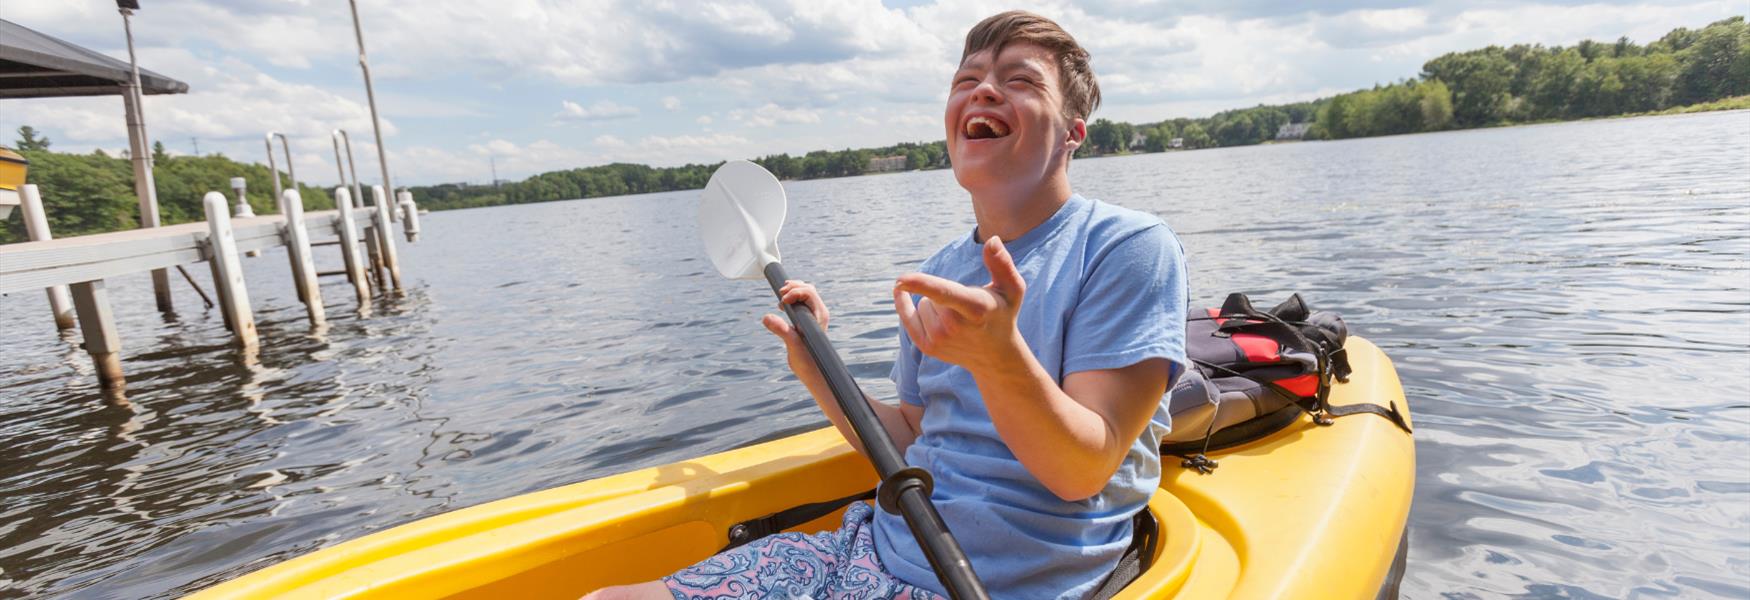 Accessible canoeing